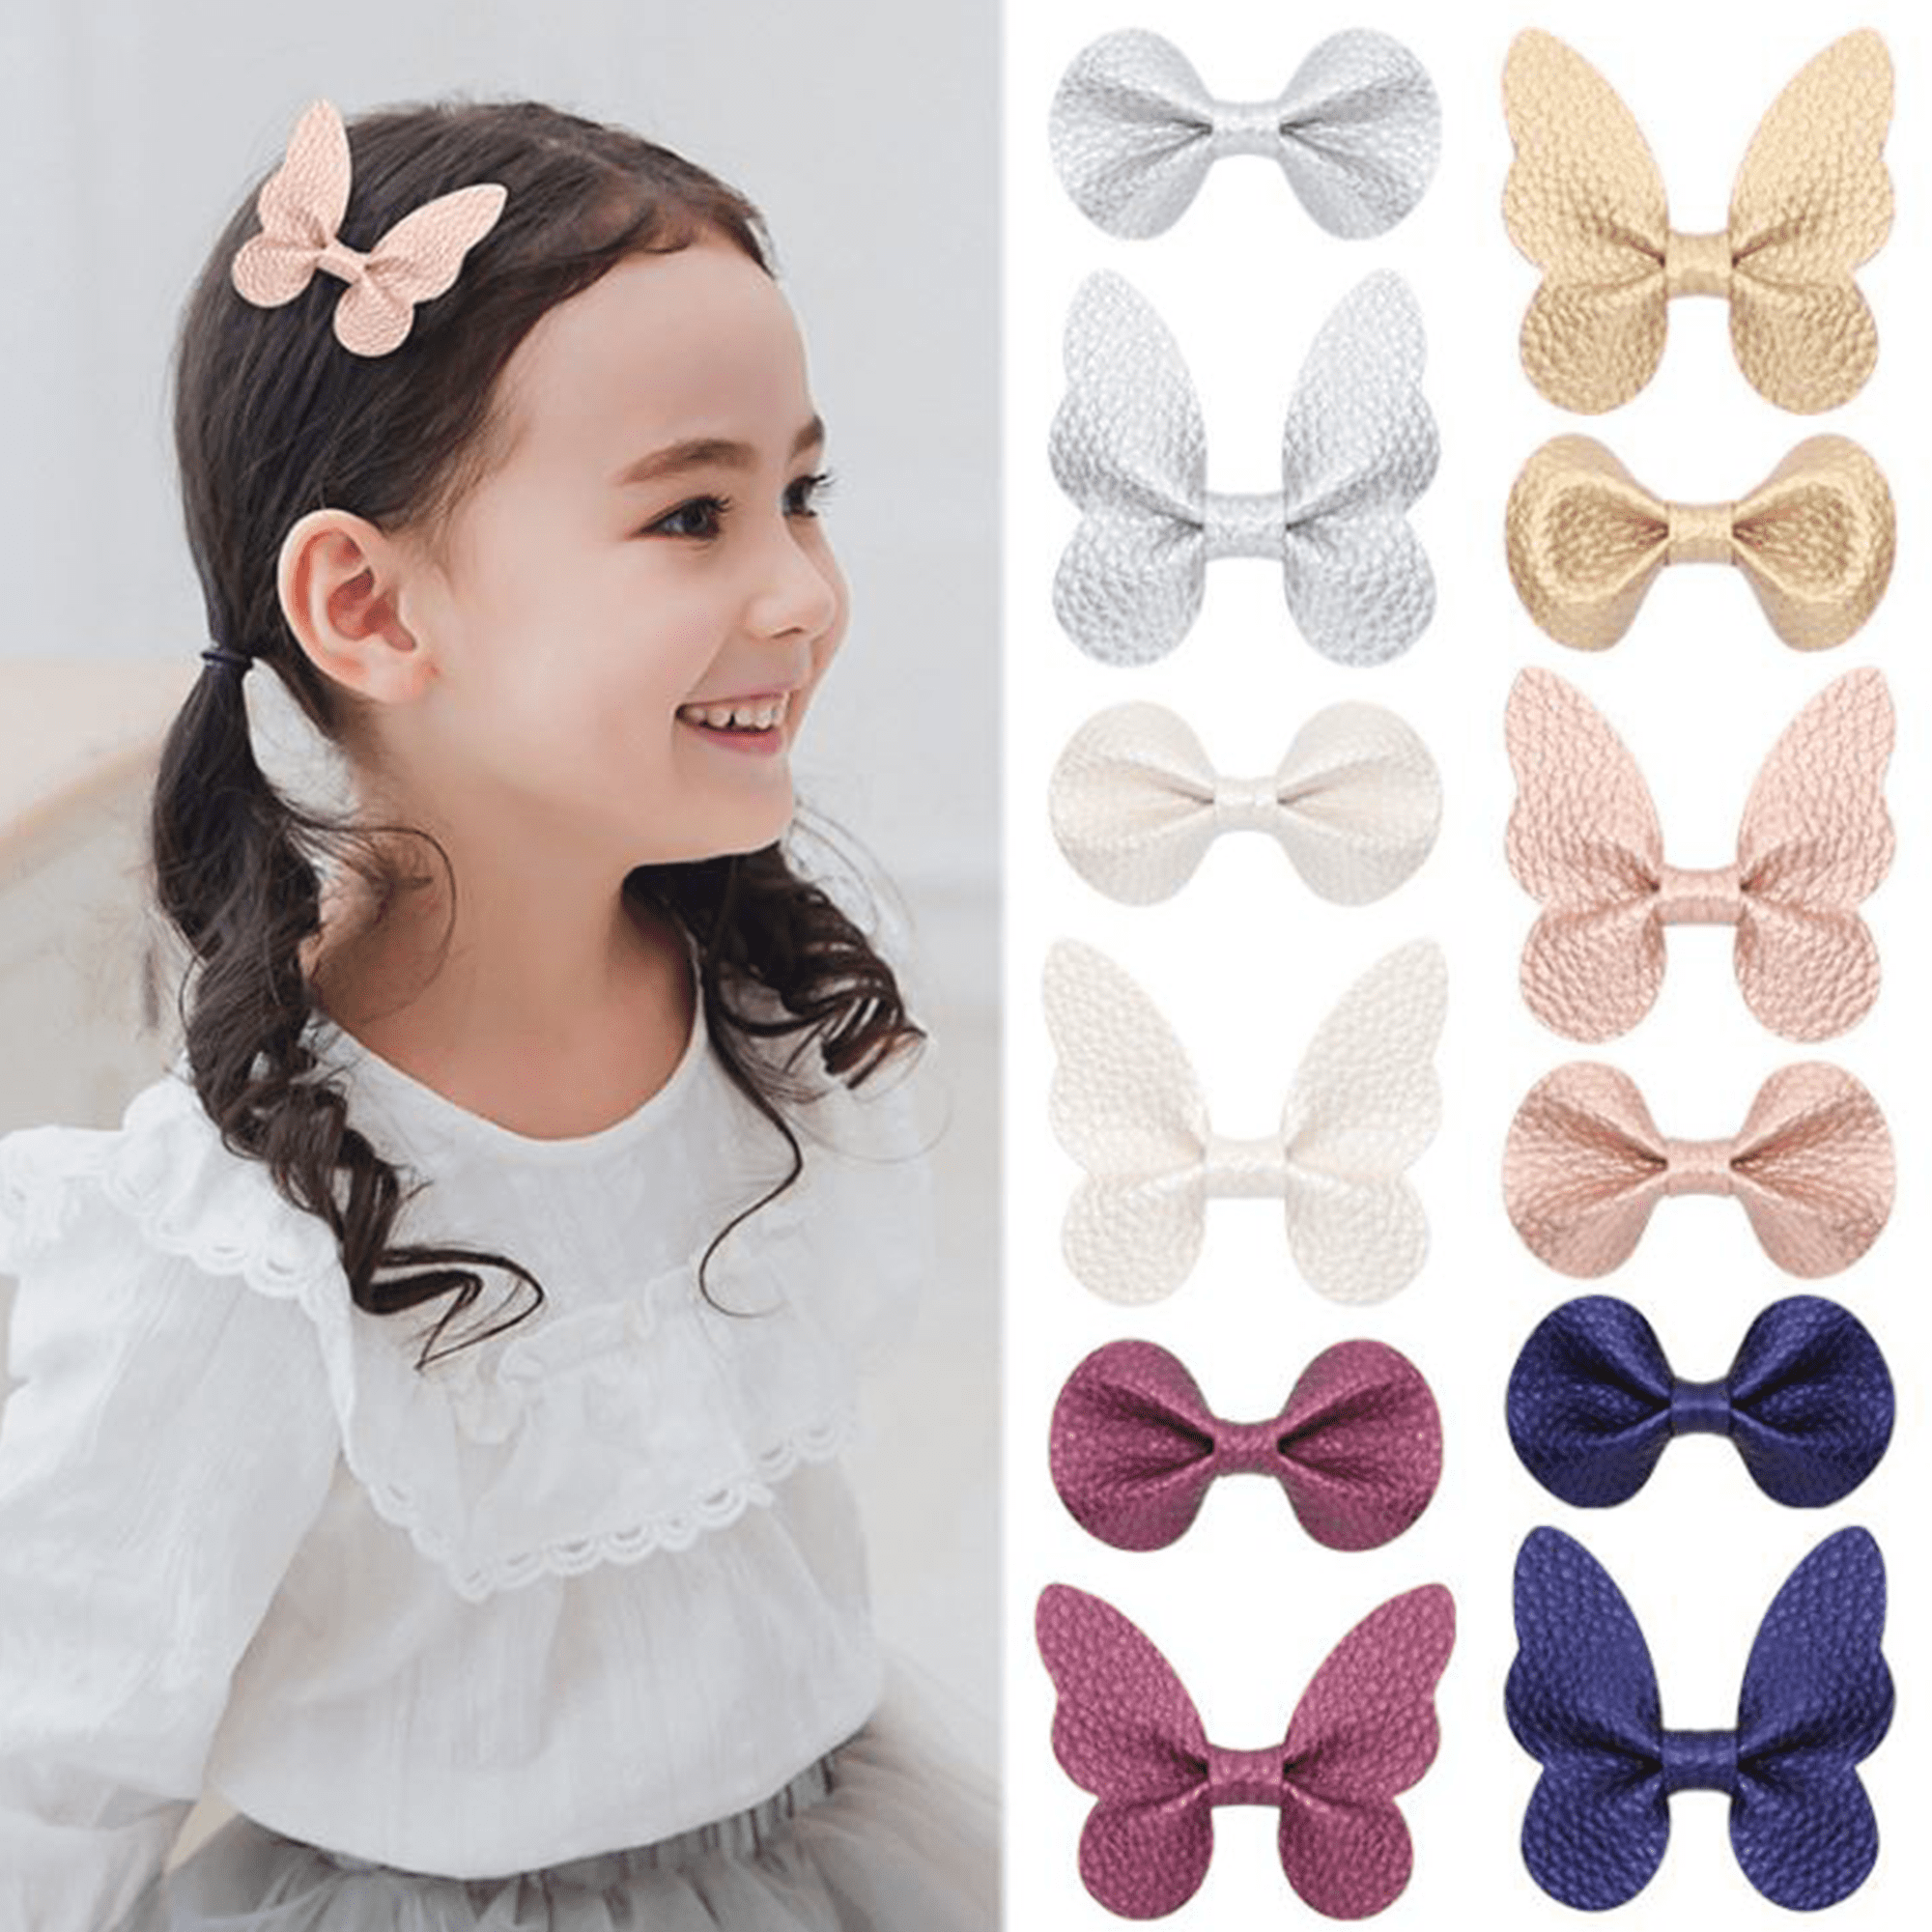 12Pcs Cartoon Animal Cat Kids Barrettes Hair Clip Accessories for Baby Girls 